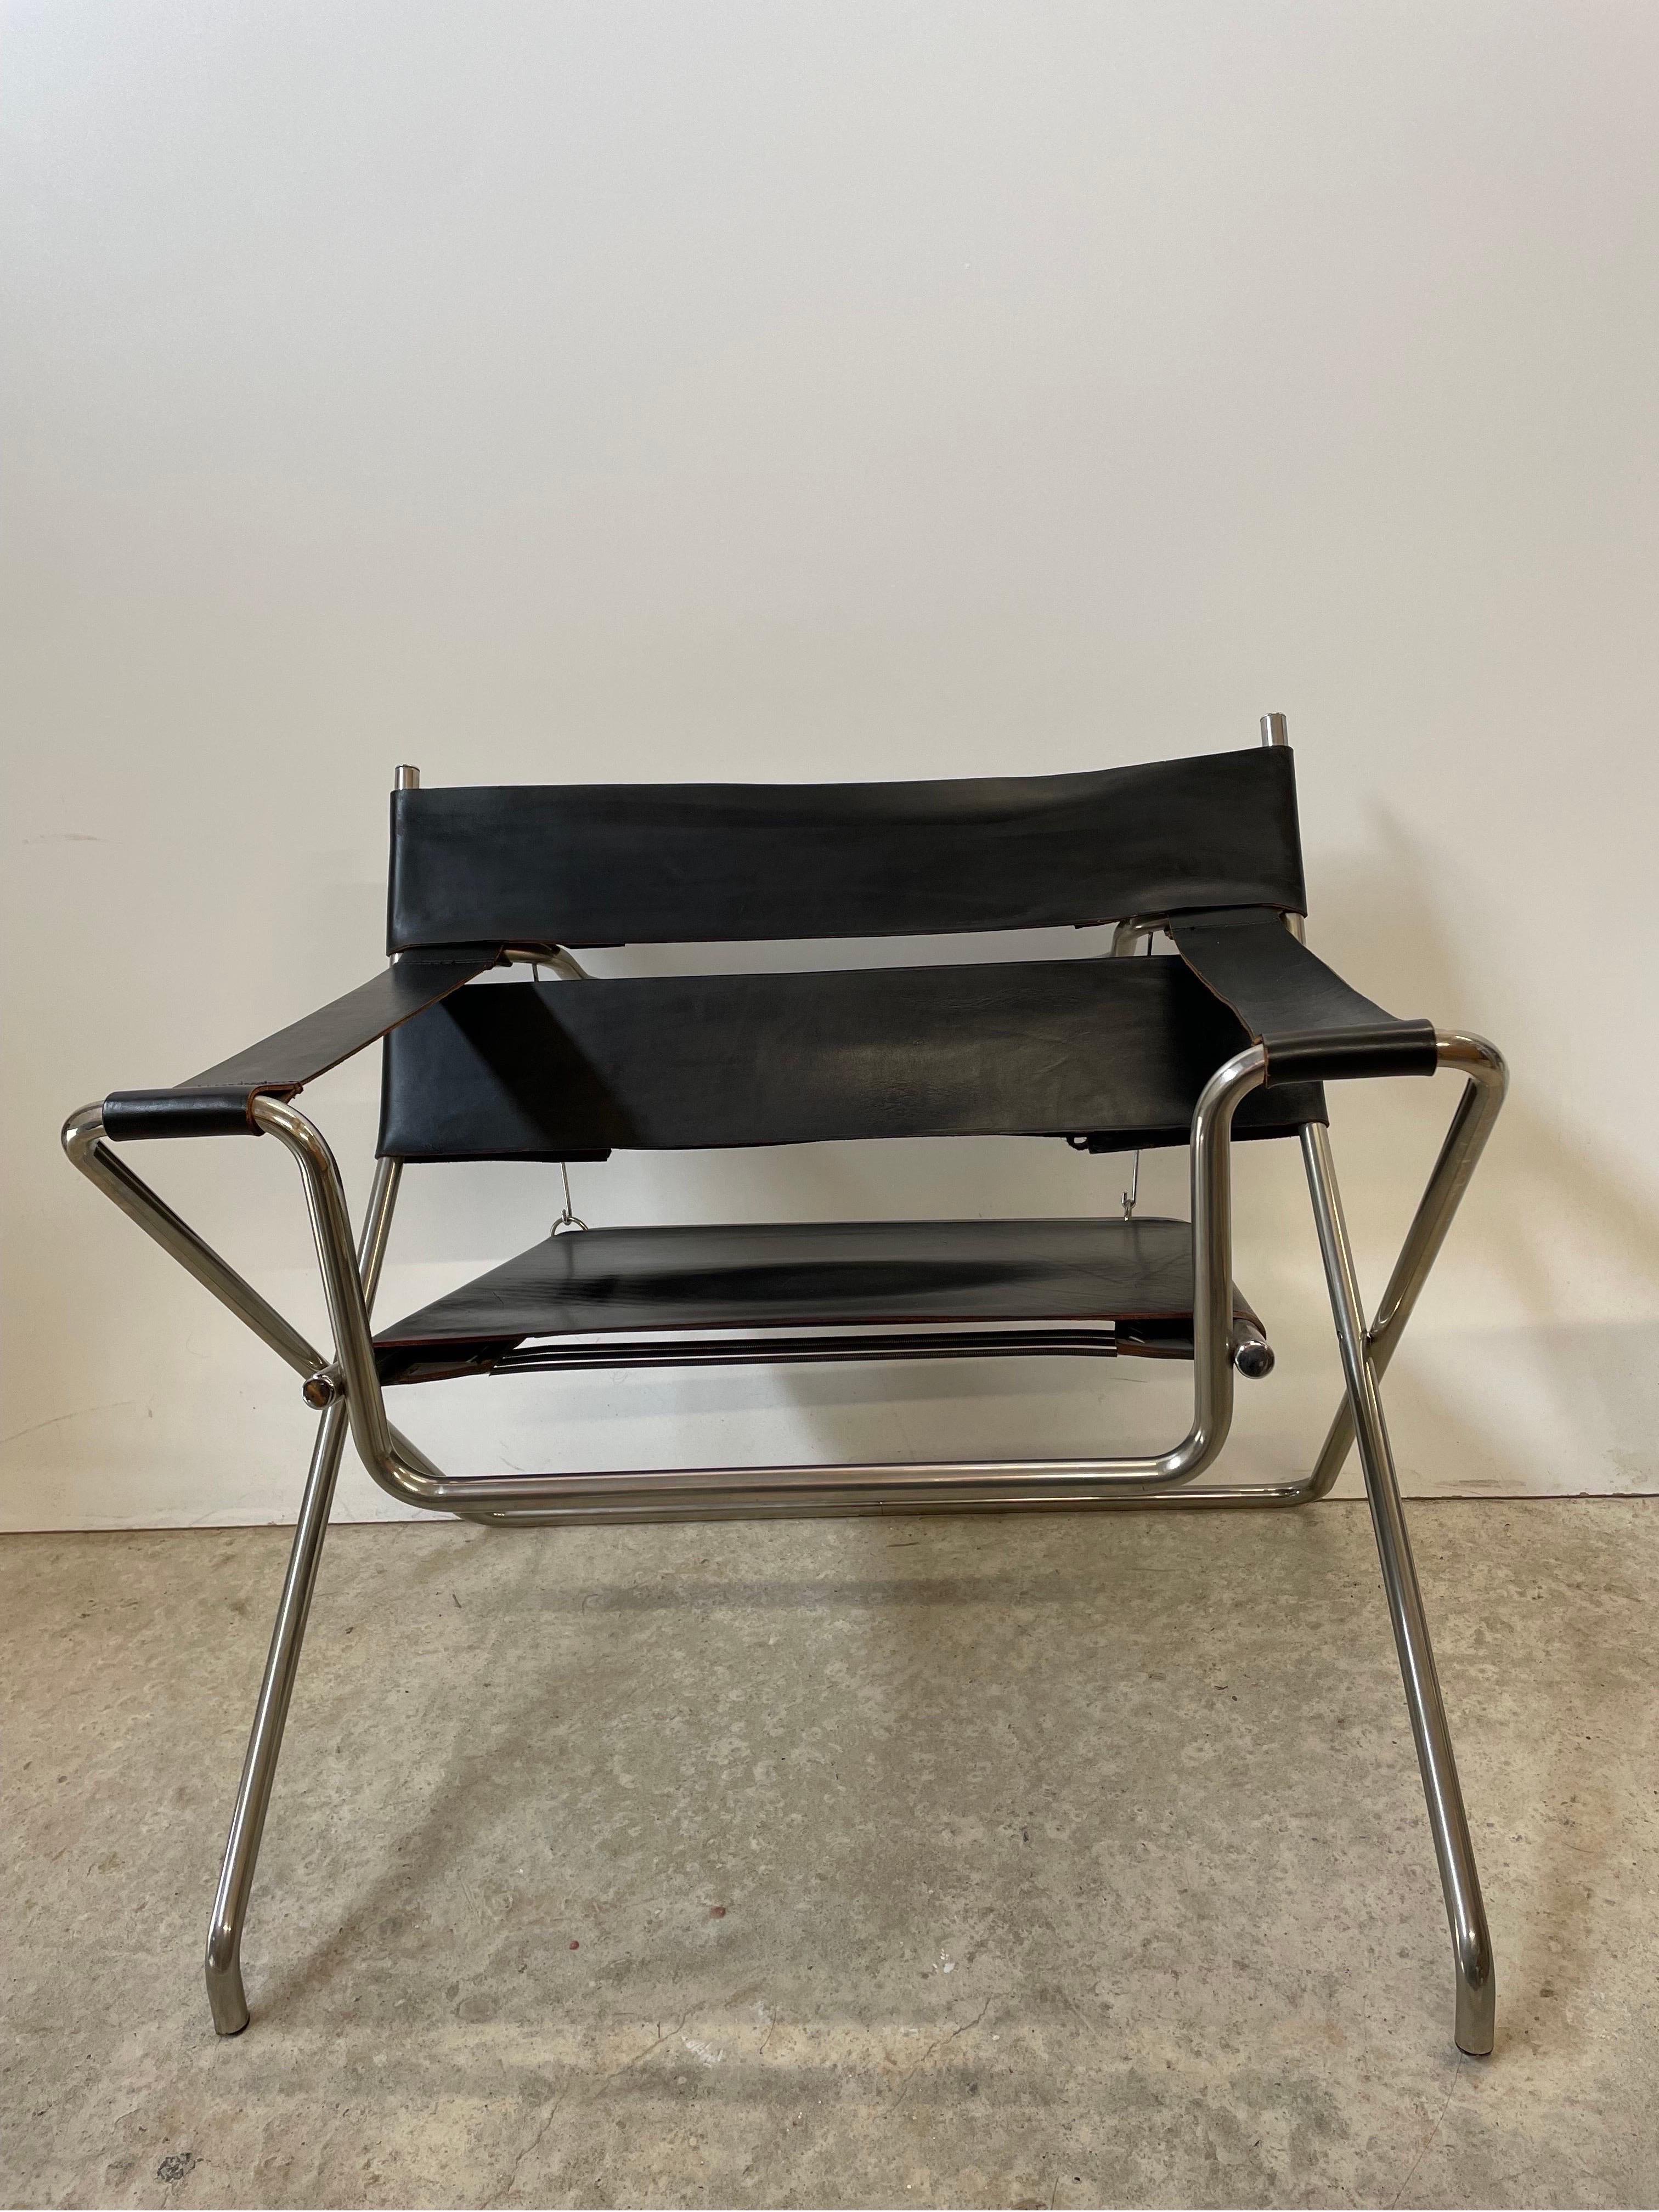 Minimalist D4 Foldingchair by Marcel Breuer for Tecta in Black Leather -1980 For Sale